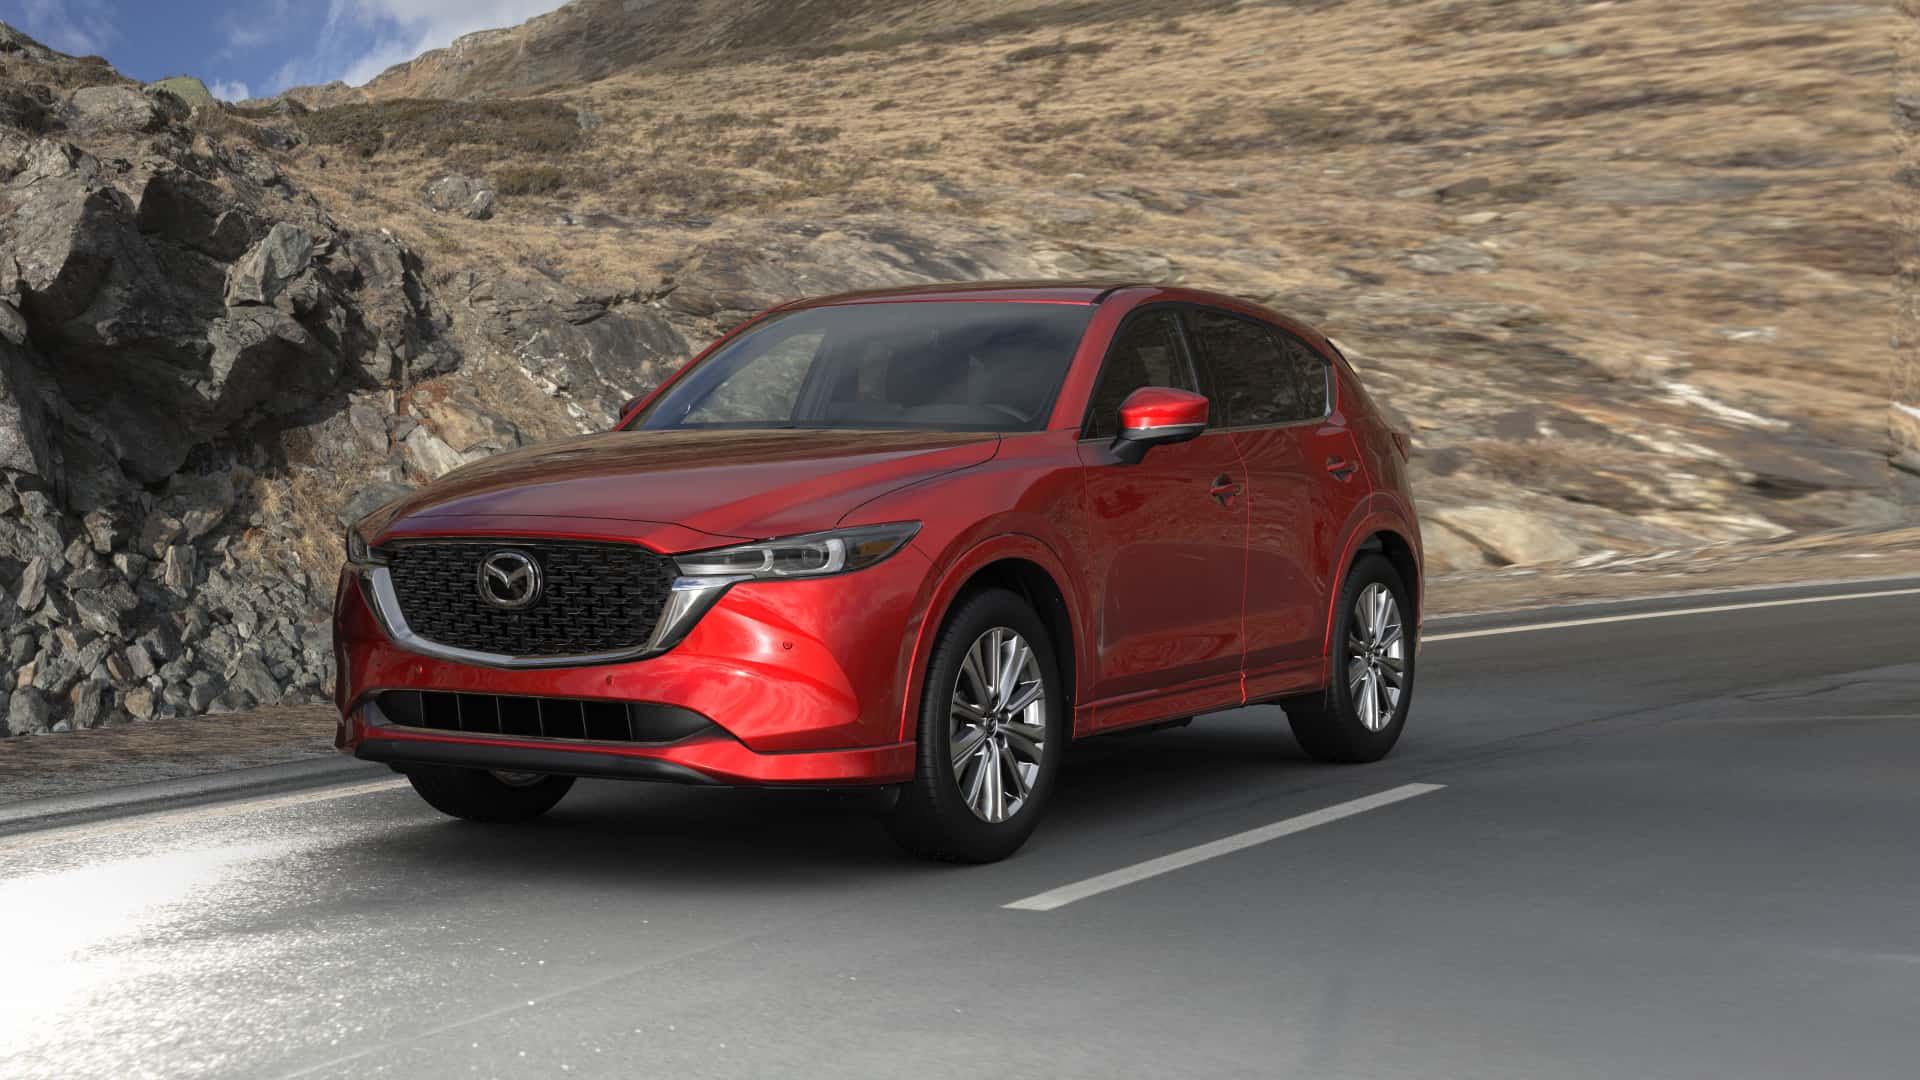 2023 Mazda CX-5 2.5 Turbo Signature Soul Red Crystal Metallic | Mazda of South Charlotte in Pineville NC